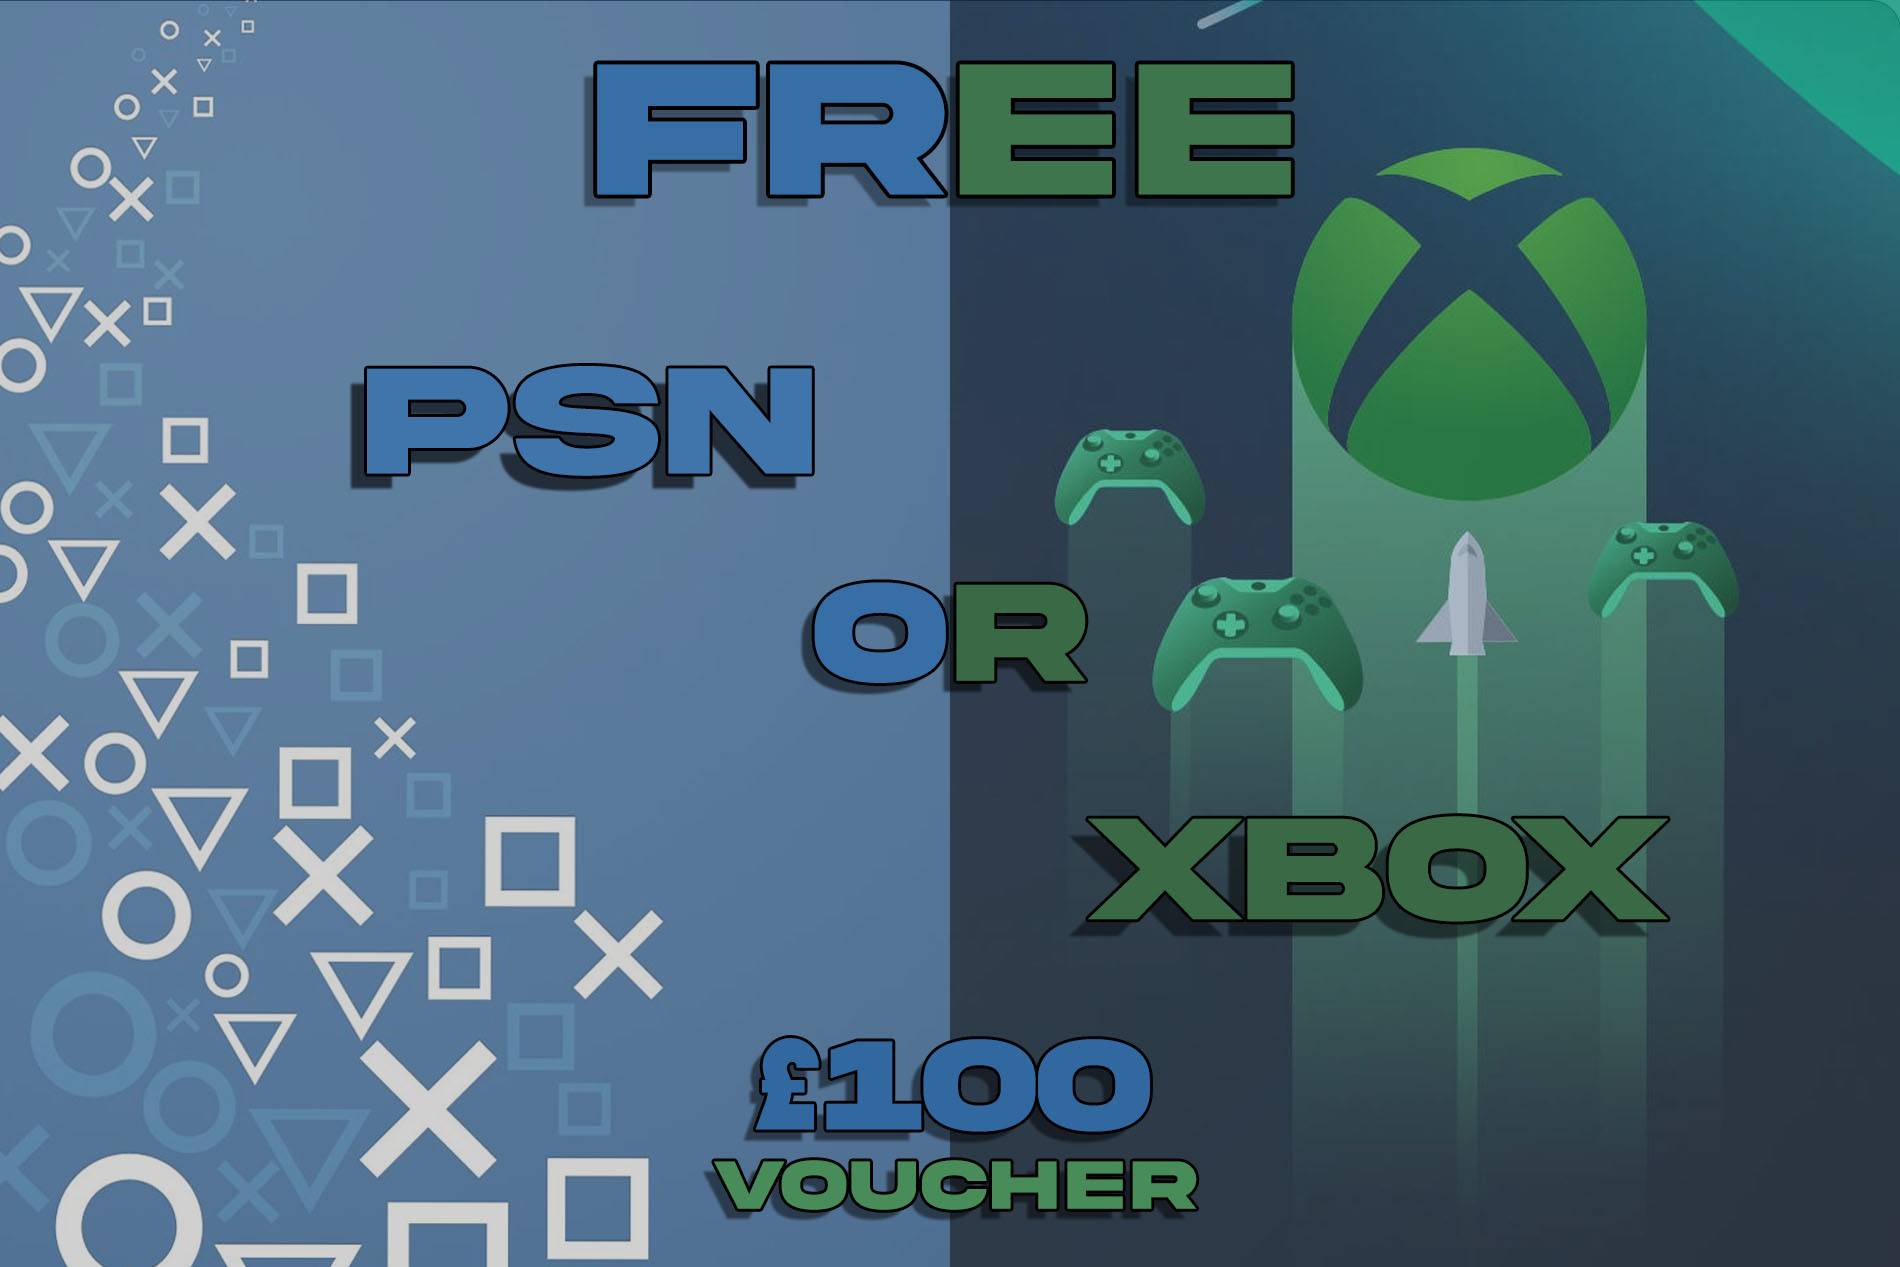 Free: Chance to Win £100 PSN or Xbox Voucher (Prize Tripled Over £1 Spend)